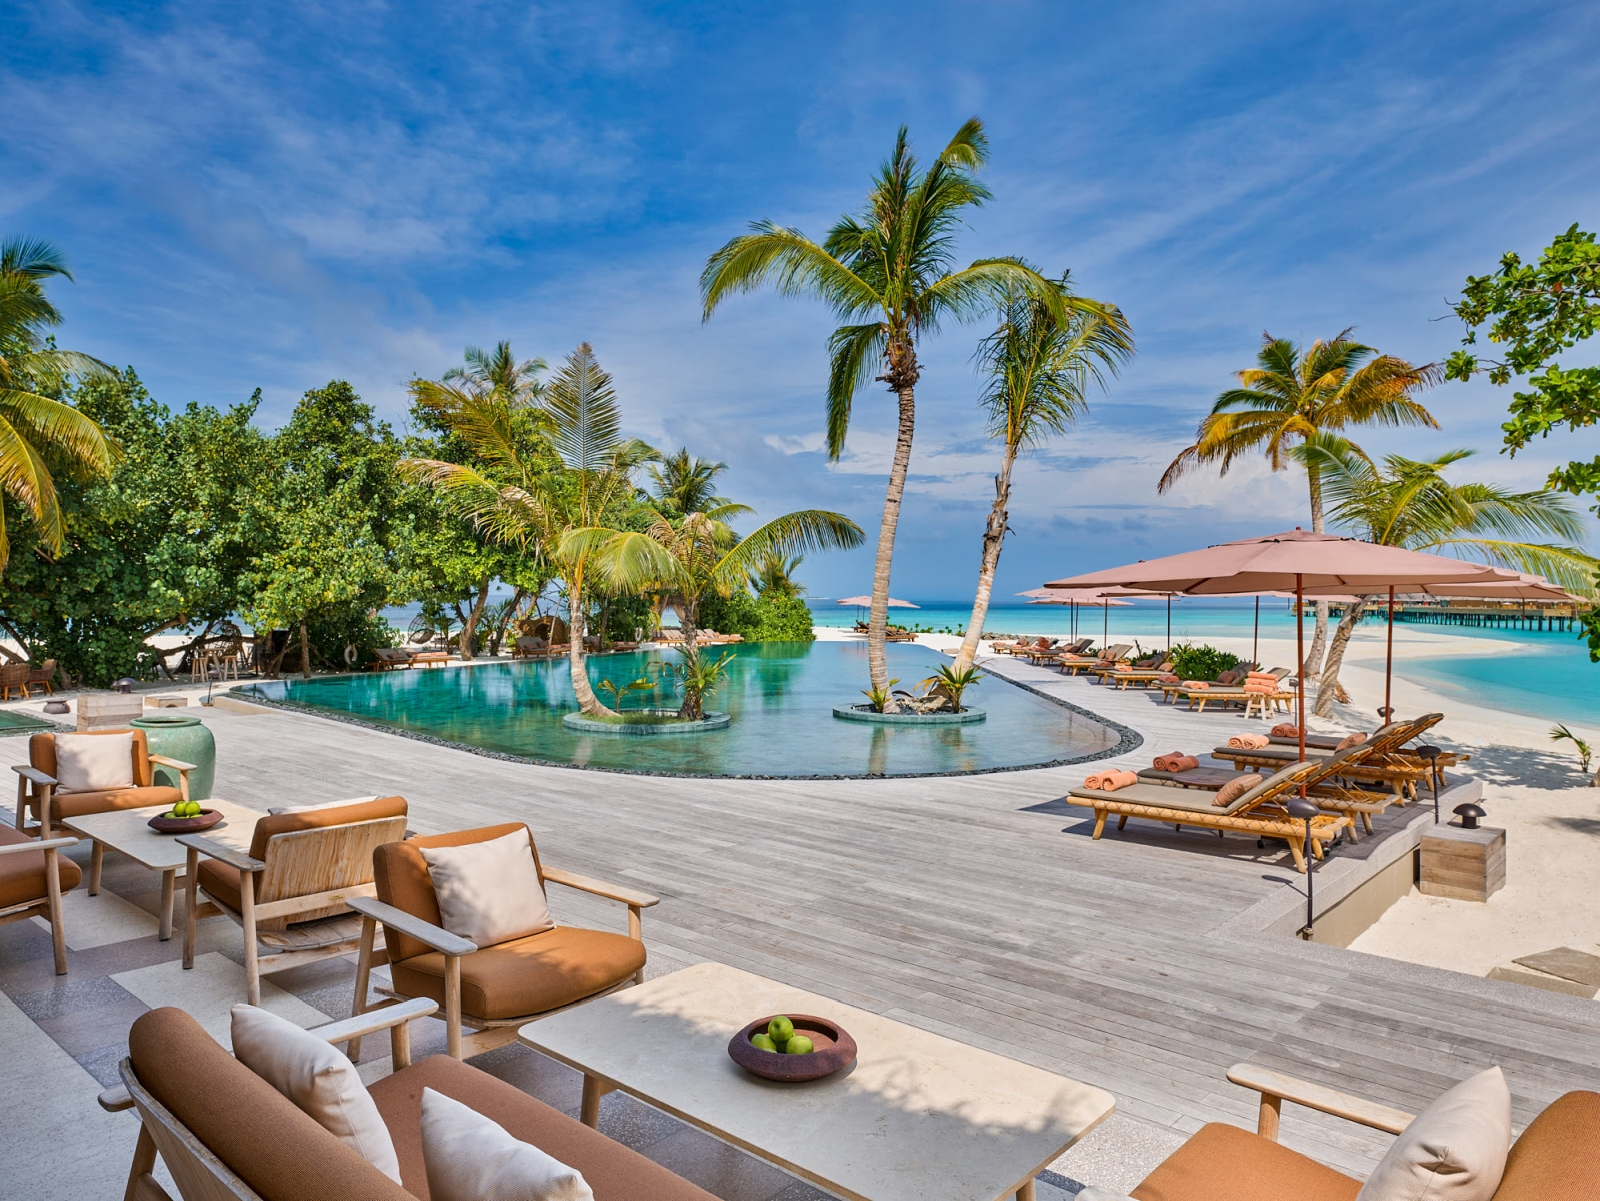 View over the palm-lined main pool at luxury resort Joali in the Maldives